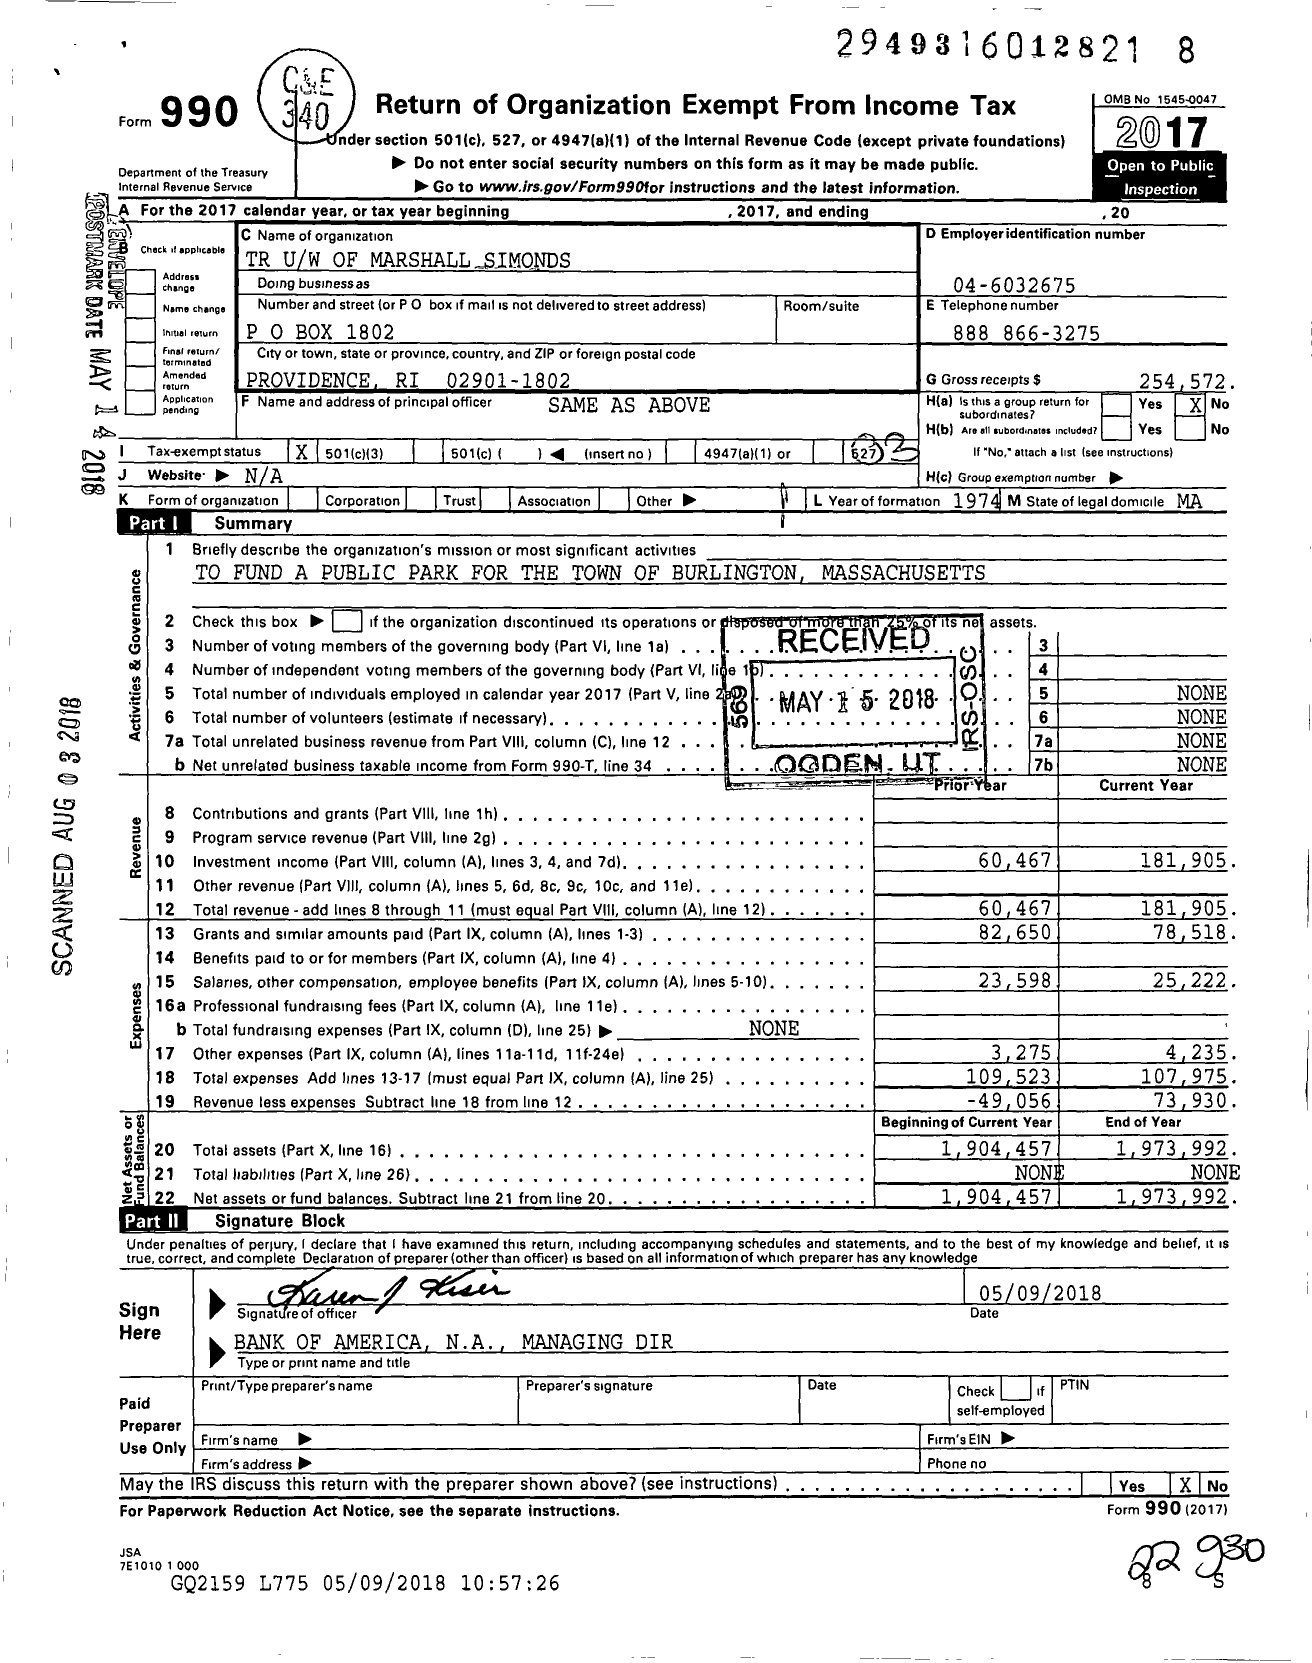 Image of first page of 2017 Form 990 for TR Uw of Marshall Simonds